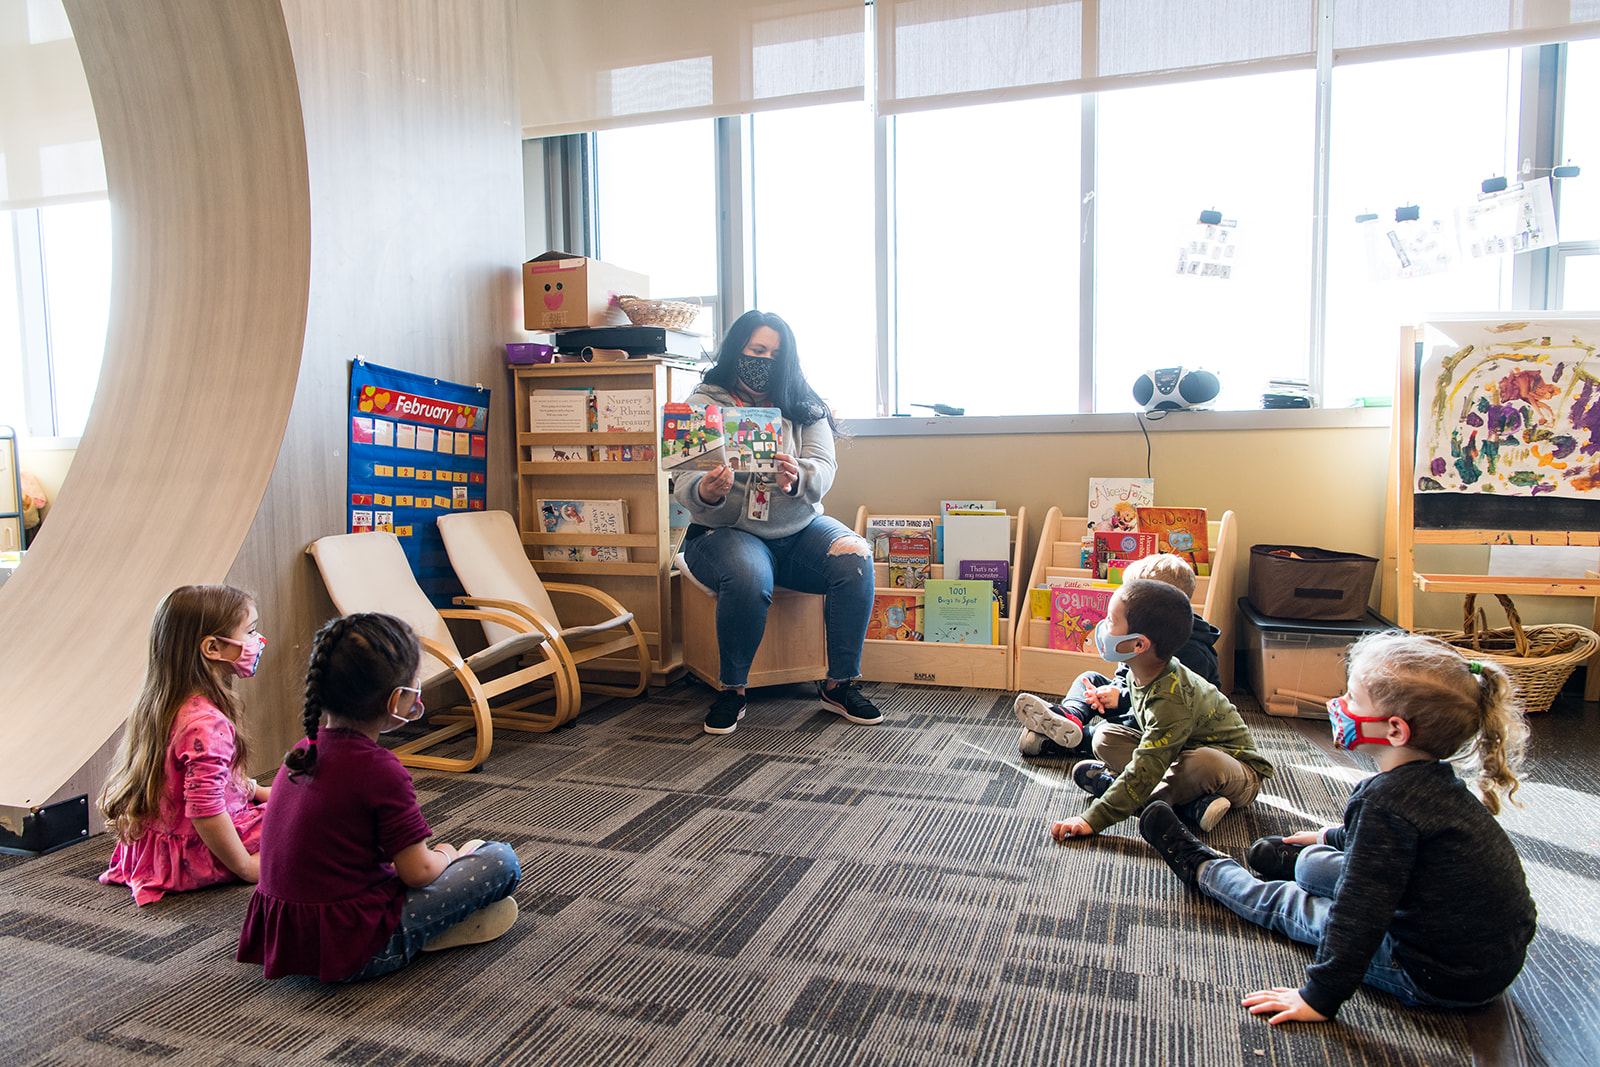 Father Joe's Villages’ mission is to reduce youth homelessness in San Diego and has shown that through helping over 350 families and 900 children overcome this obstacle since 1982. Their Therapeutic Children's Center is seen here. Photo courtesy Father Joe's Villages.